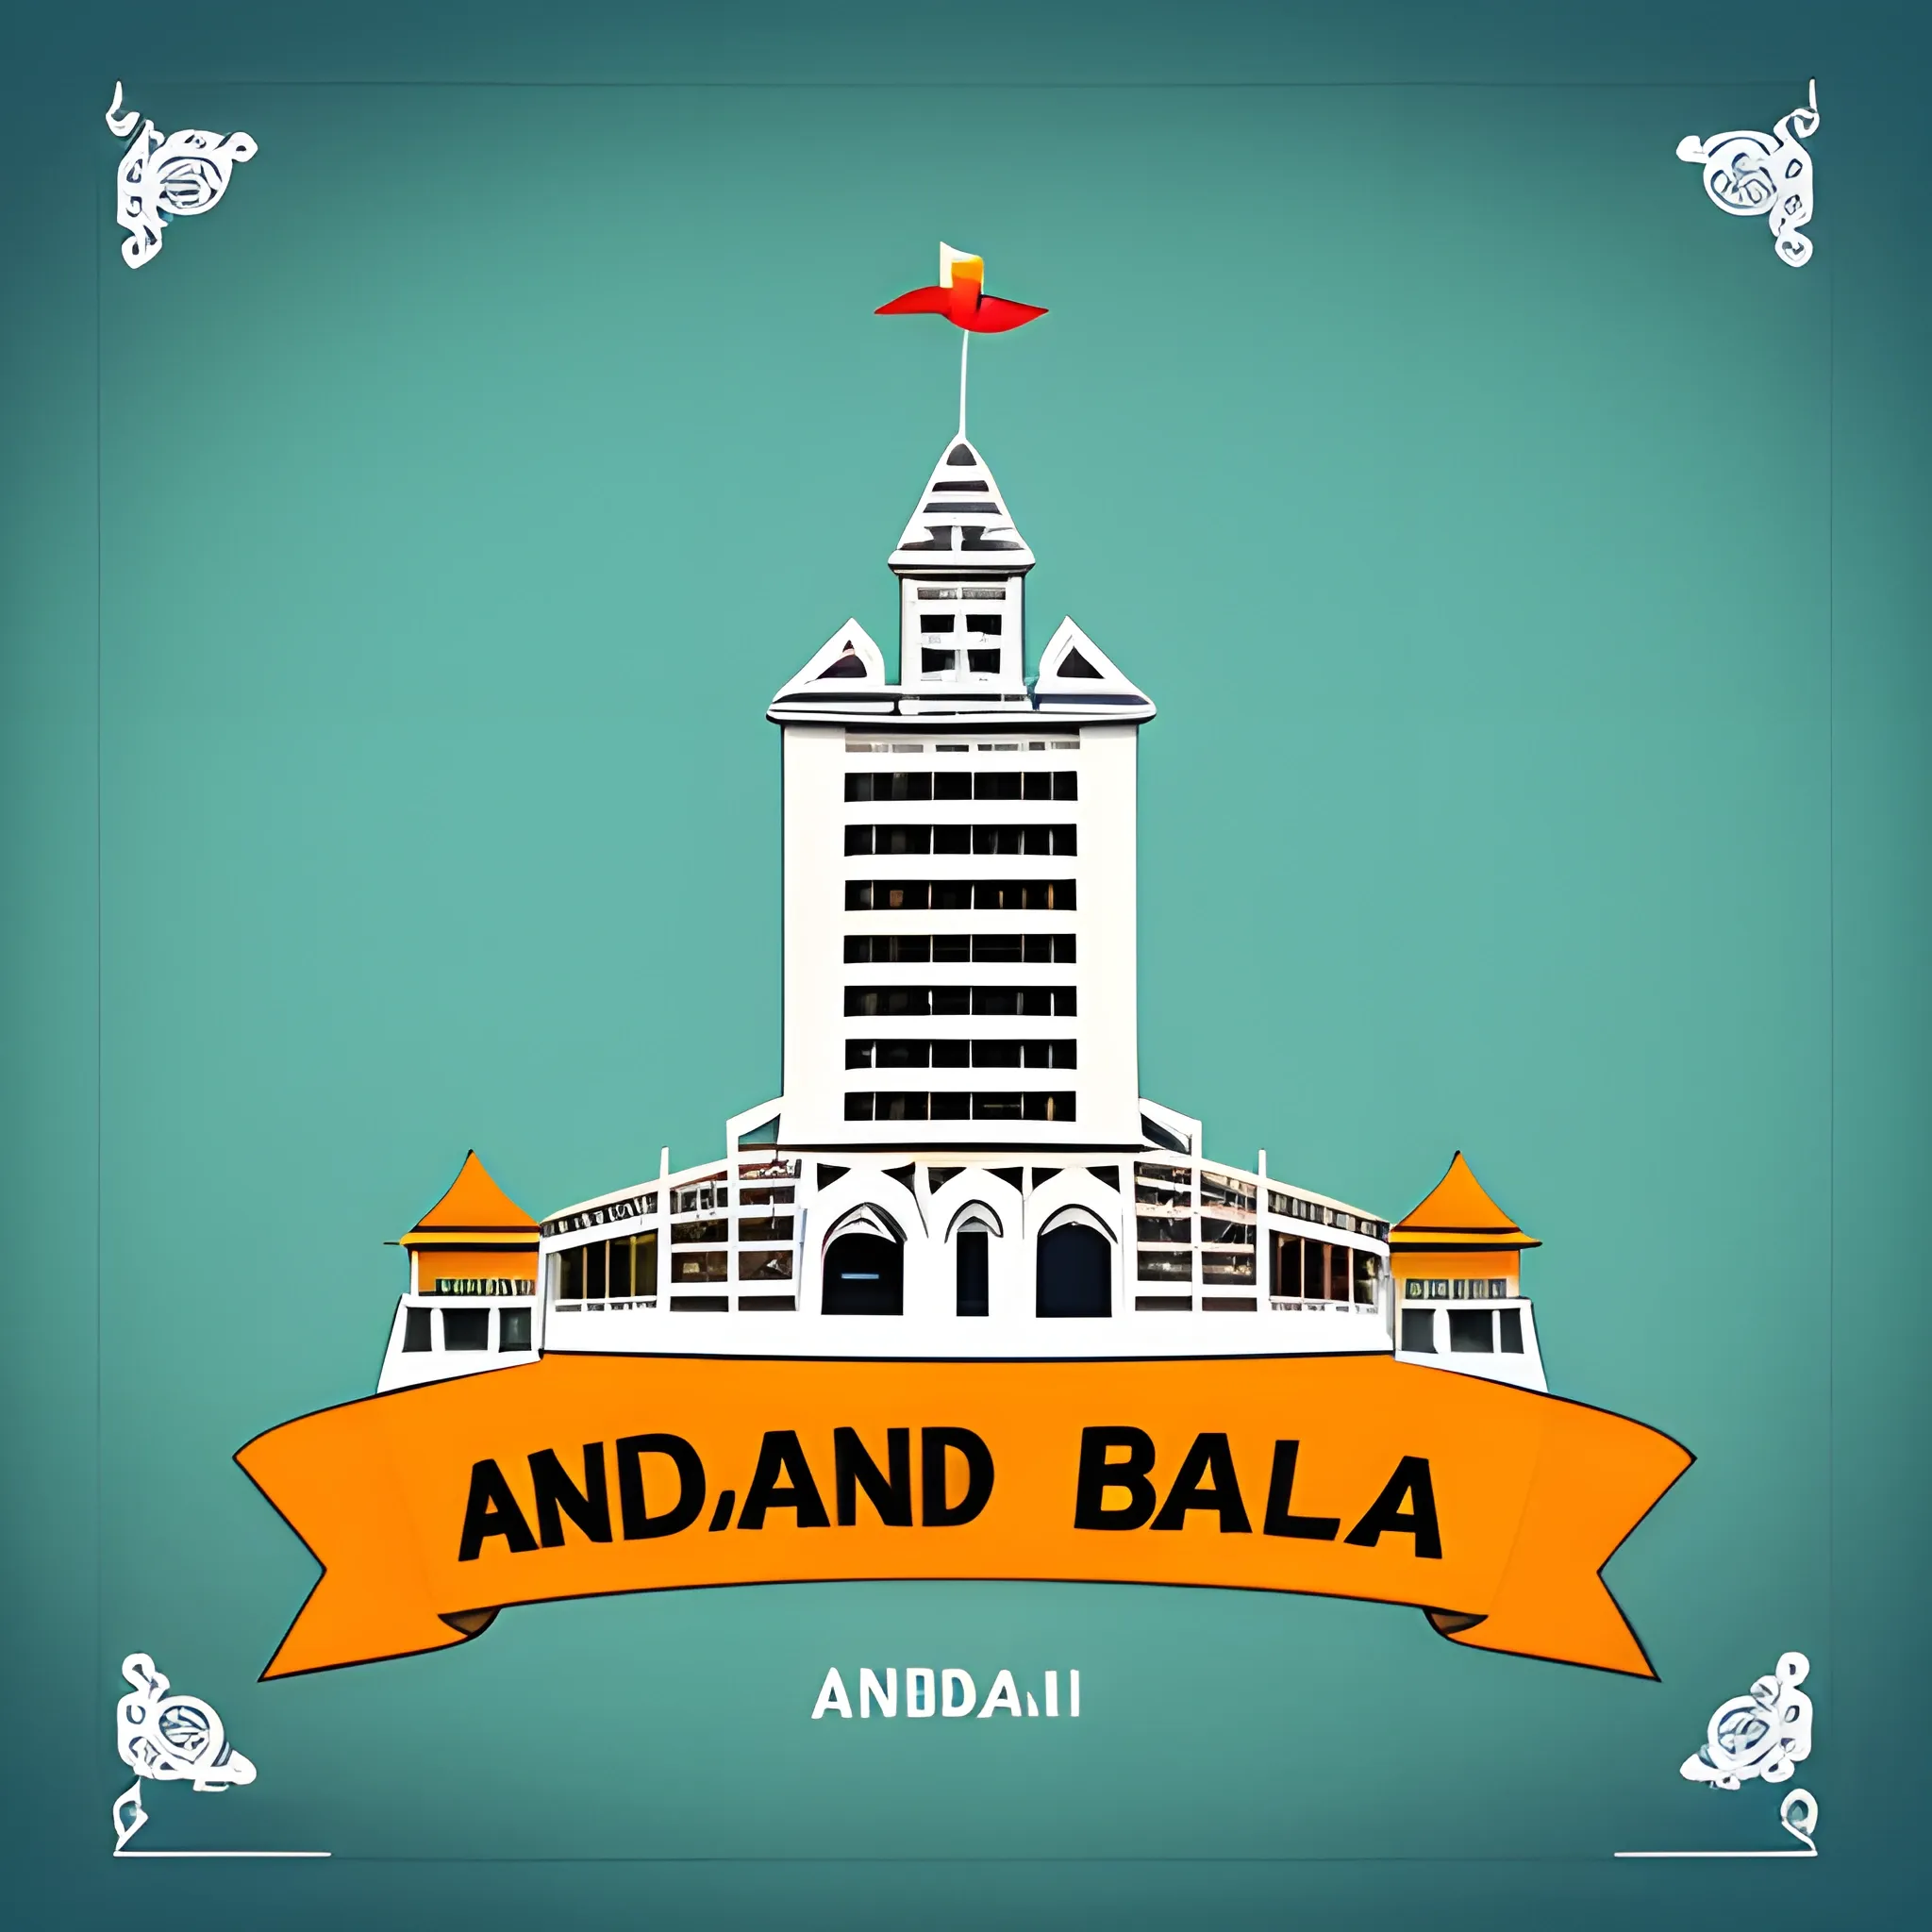 Andaman and Nicobar  slogan,Cellular Jail of Andaman and Nicobar and other buildings vintage, vector, t-shirt design, bright background,Pencil Sketch, 3D